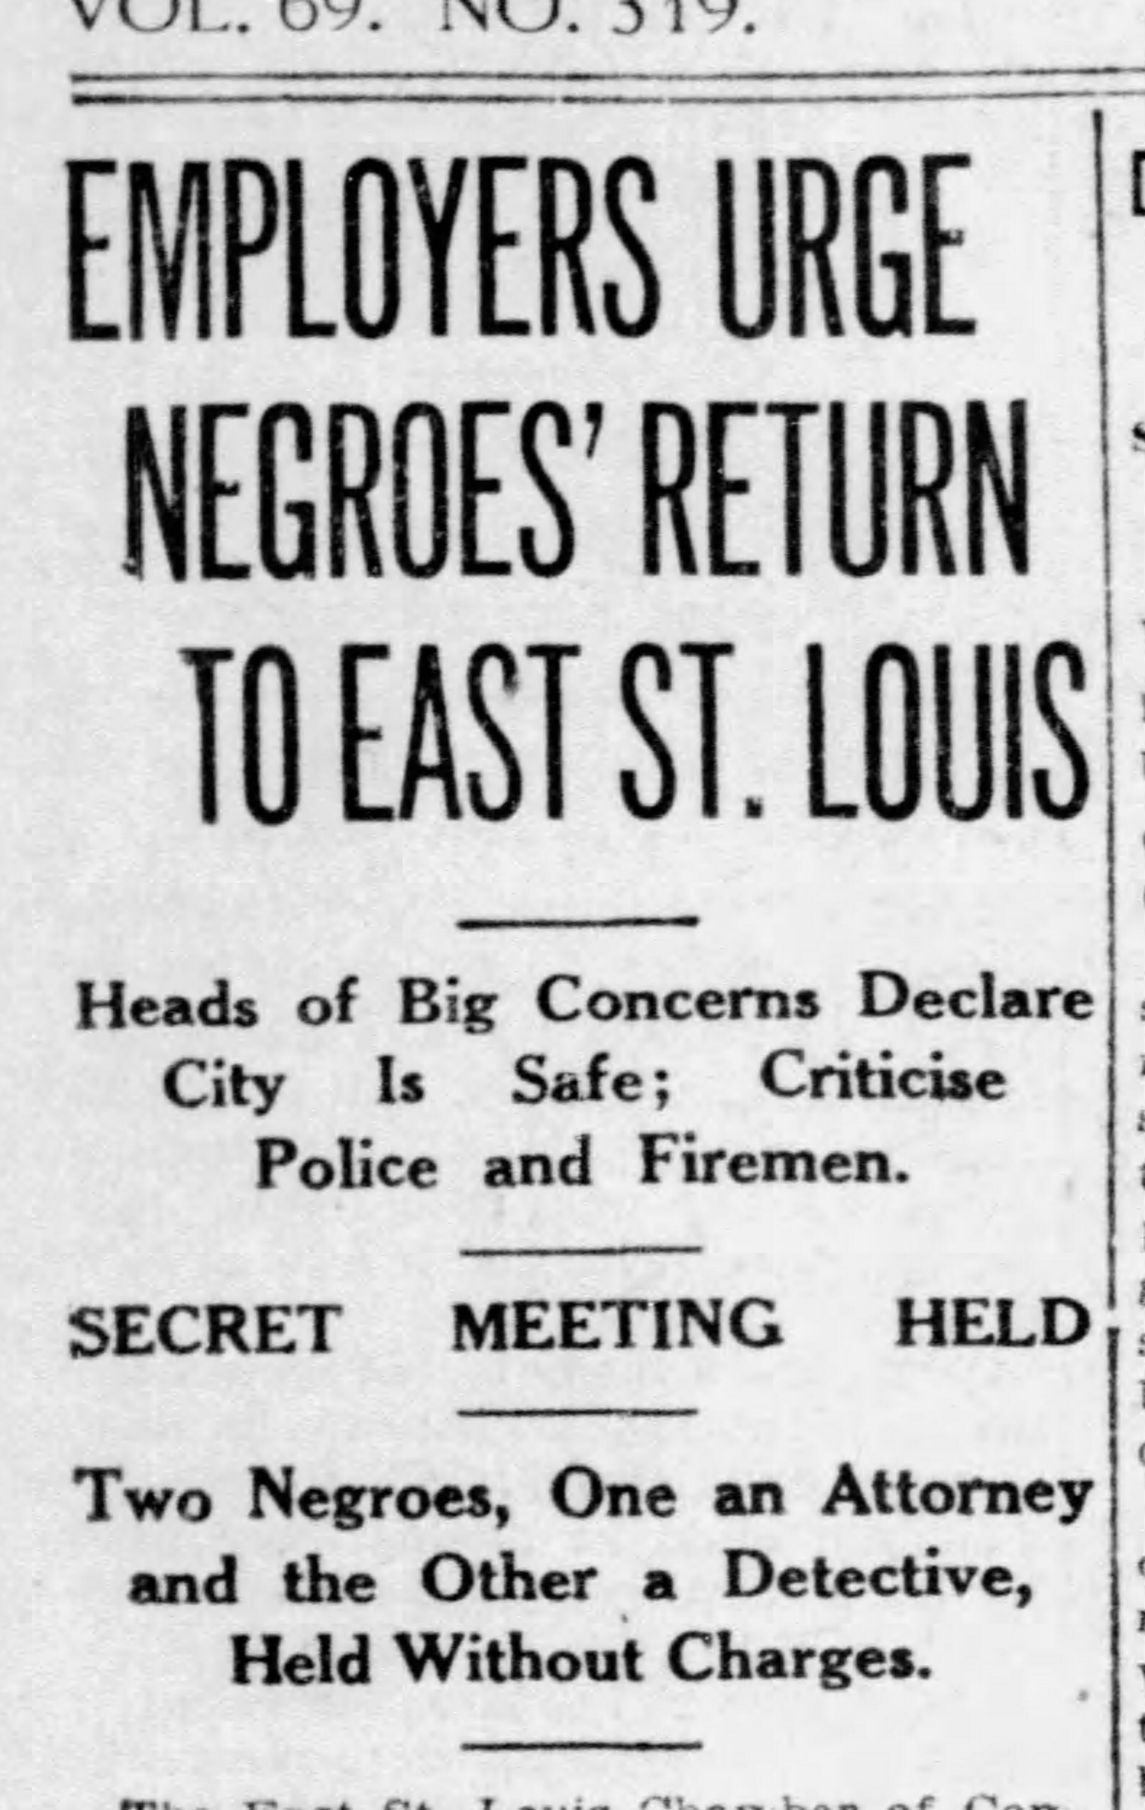 Followup coverage of East St. Louis riots | Post-Dispatch Archives | literacybasics.ca